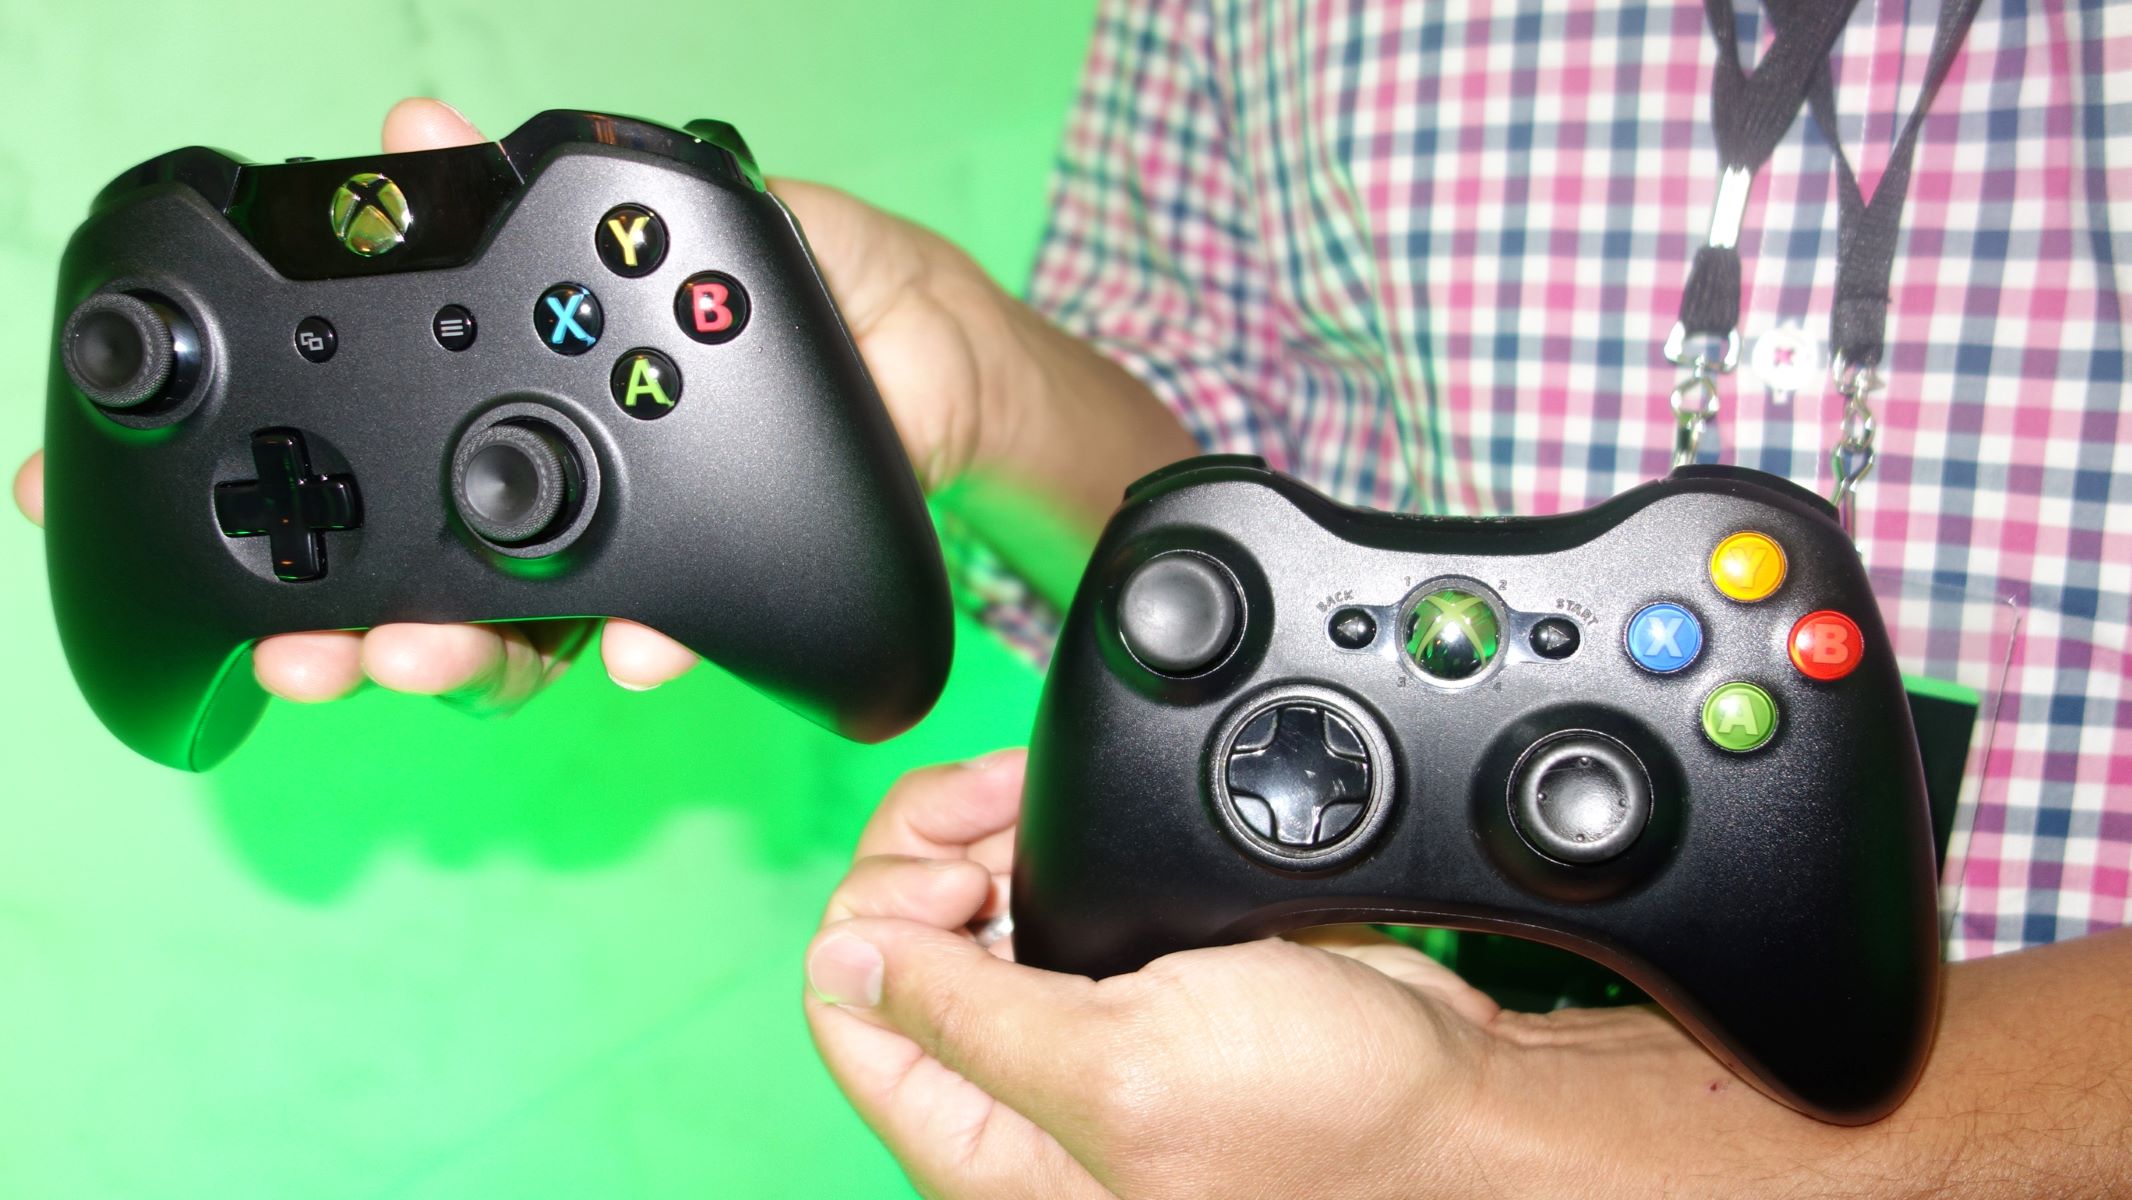 GT Racing 2 Supports Which Game Controller: Xbox 360 Or Xbox One For PC?